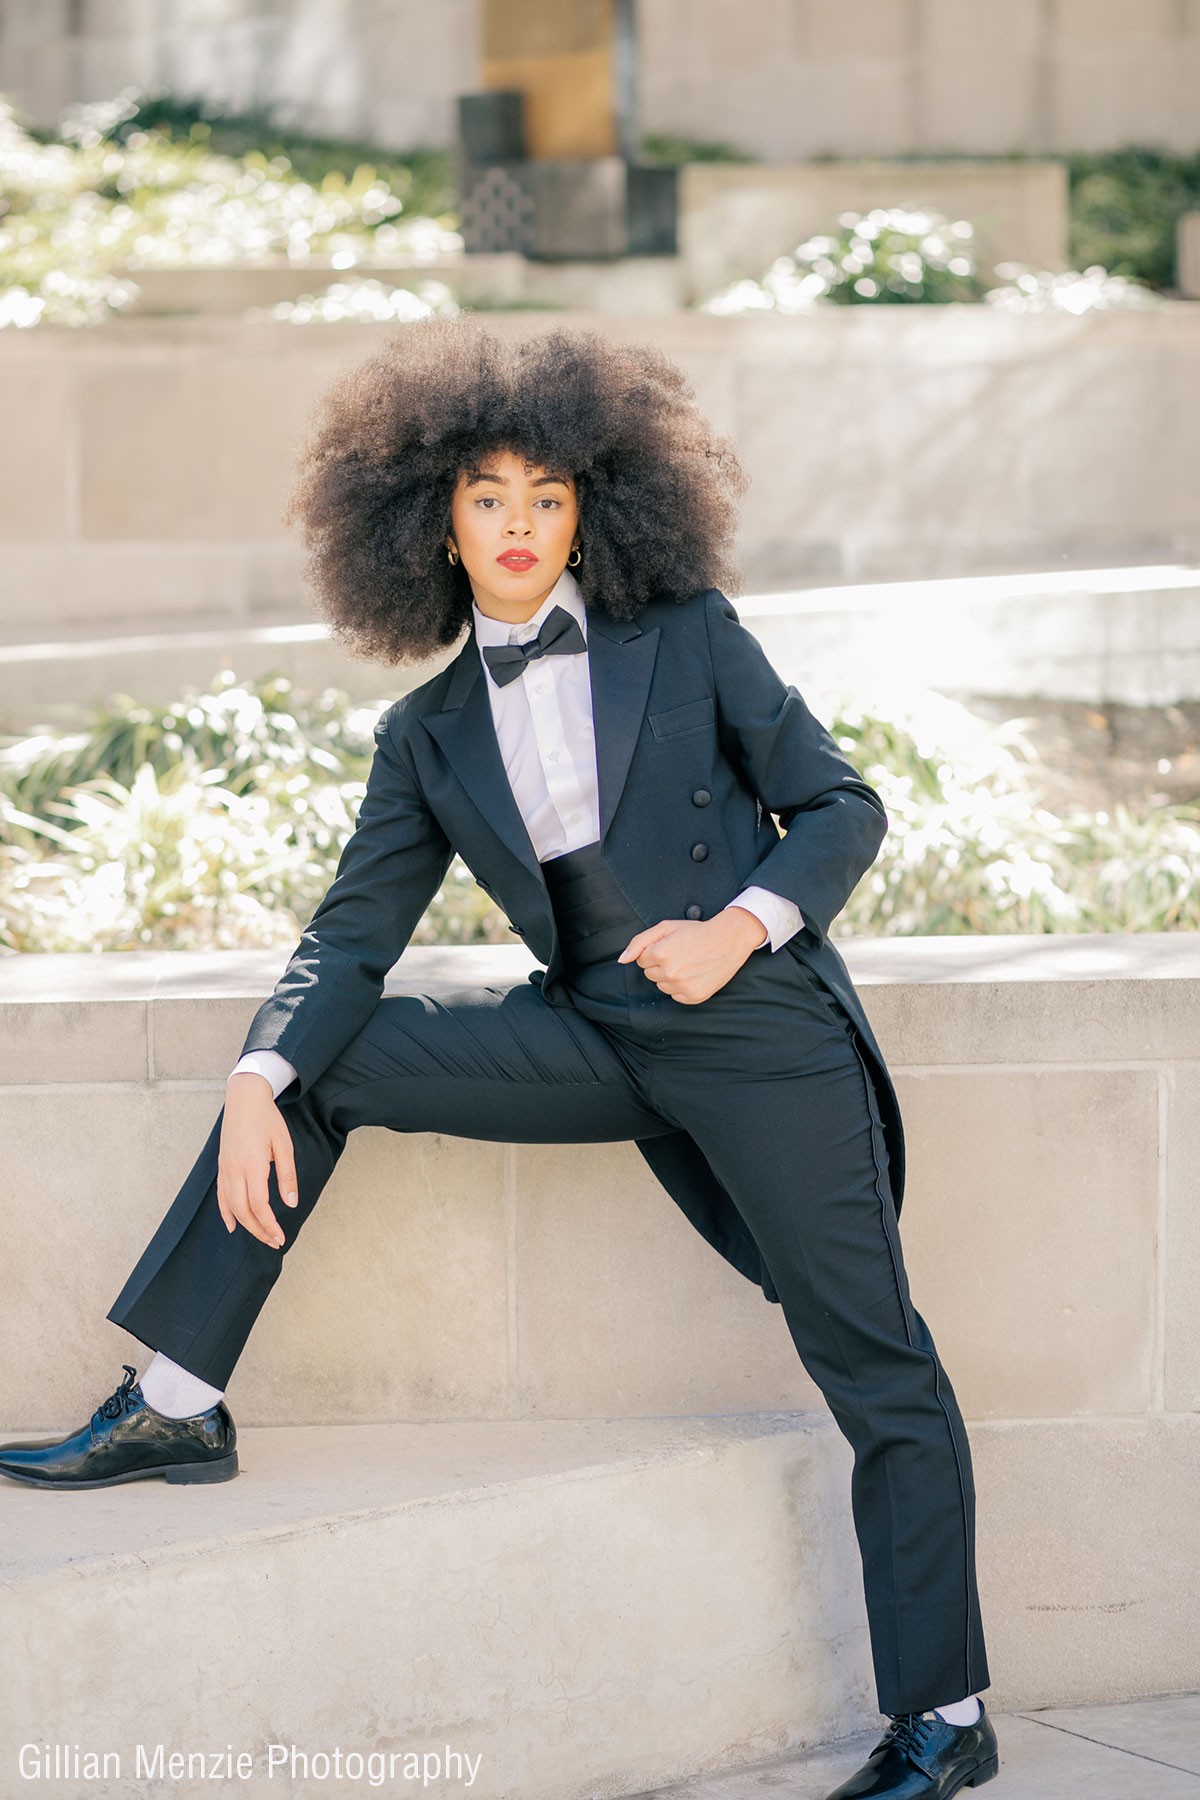 Ladies Tuxedo Shoot for Black History Month featuring Ladies Tuxedos from Rex Formal Wear